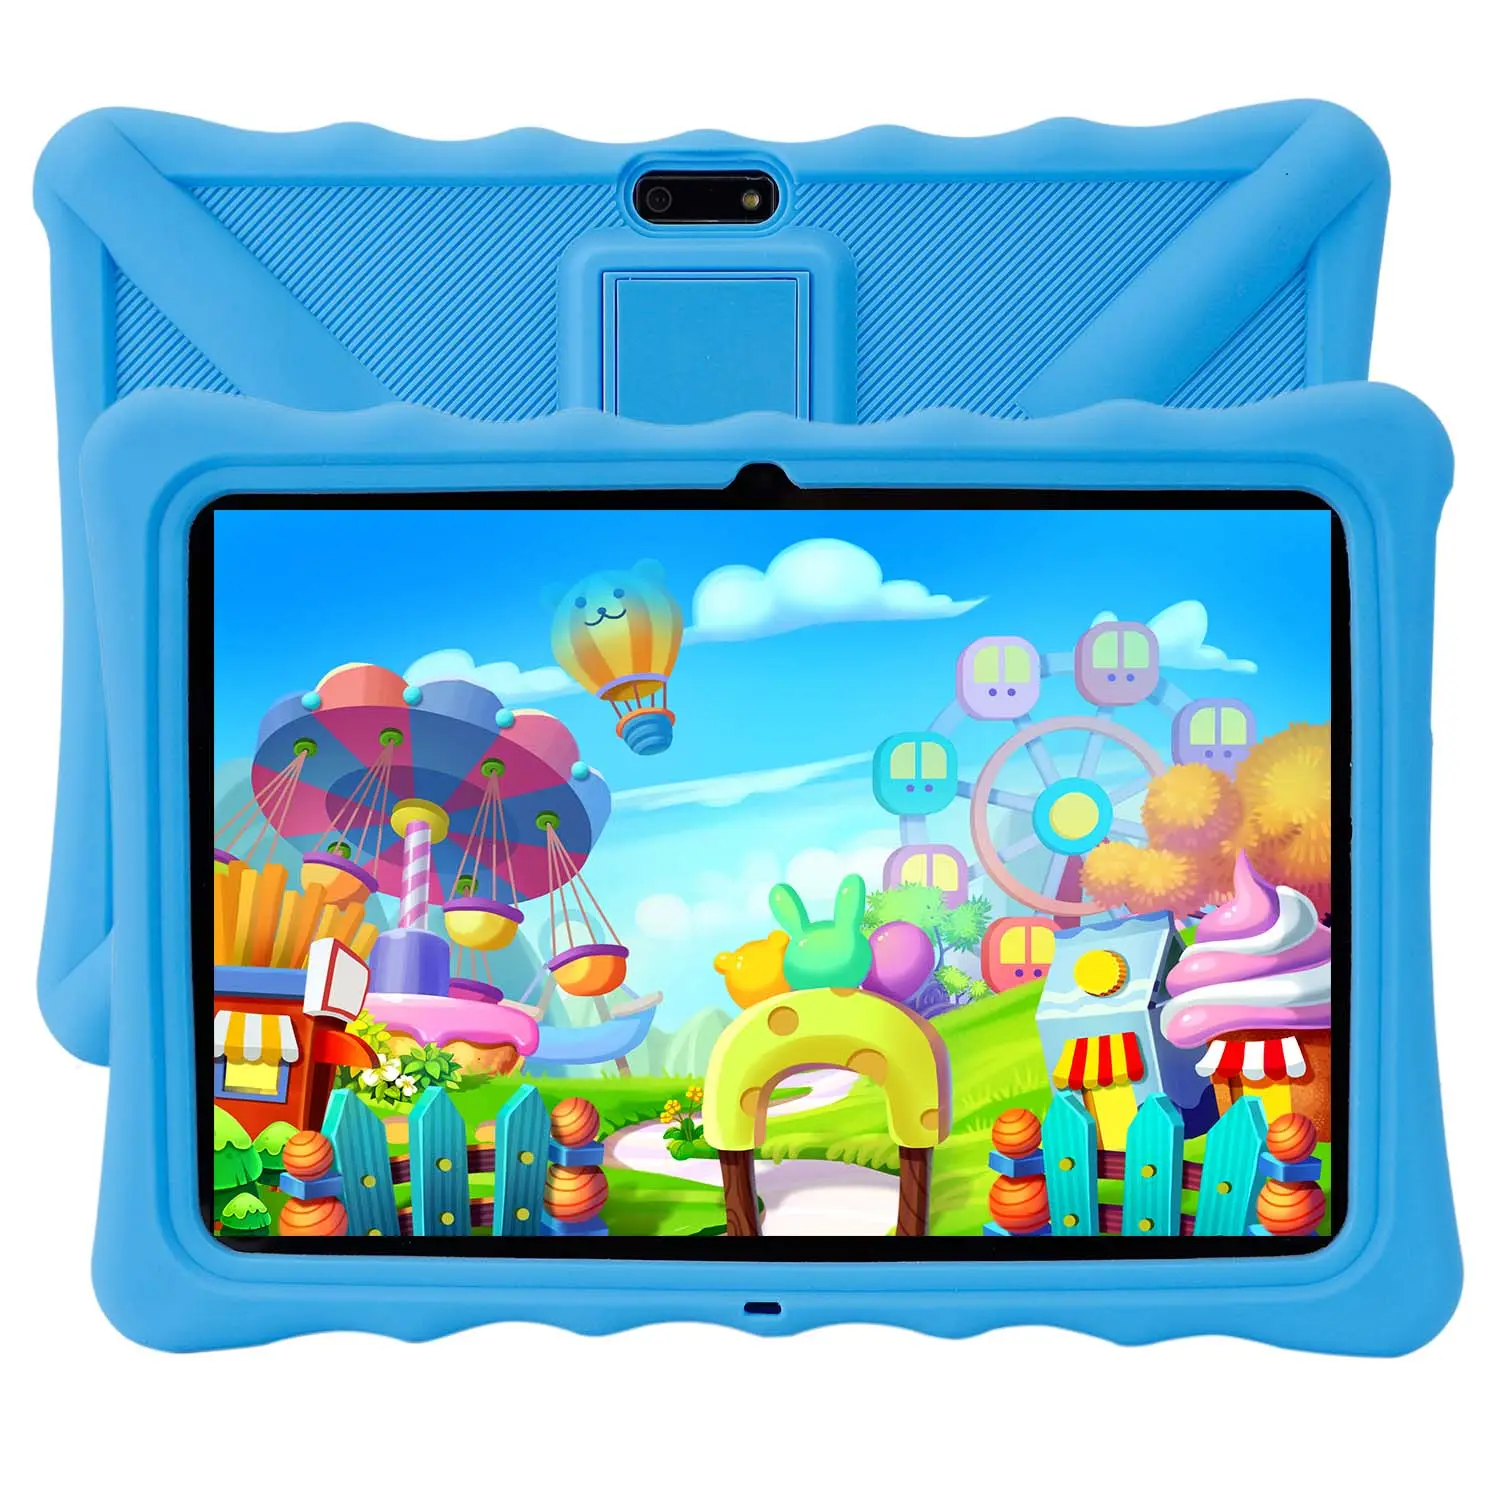 New Design Full High Definition 10 Inch Kids Educational Learning Toys Android Tablet Pc with Wifi